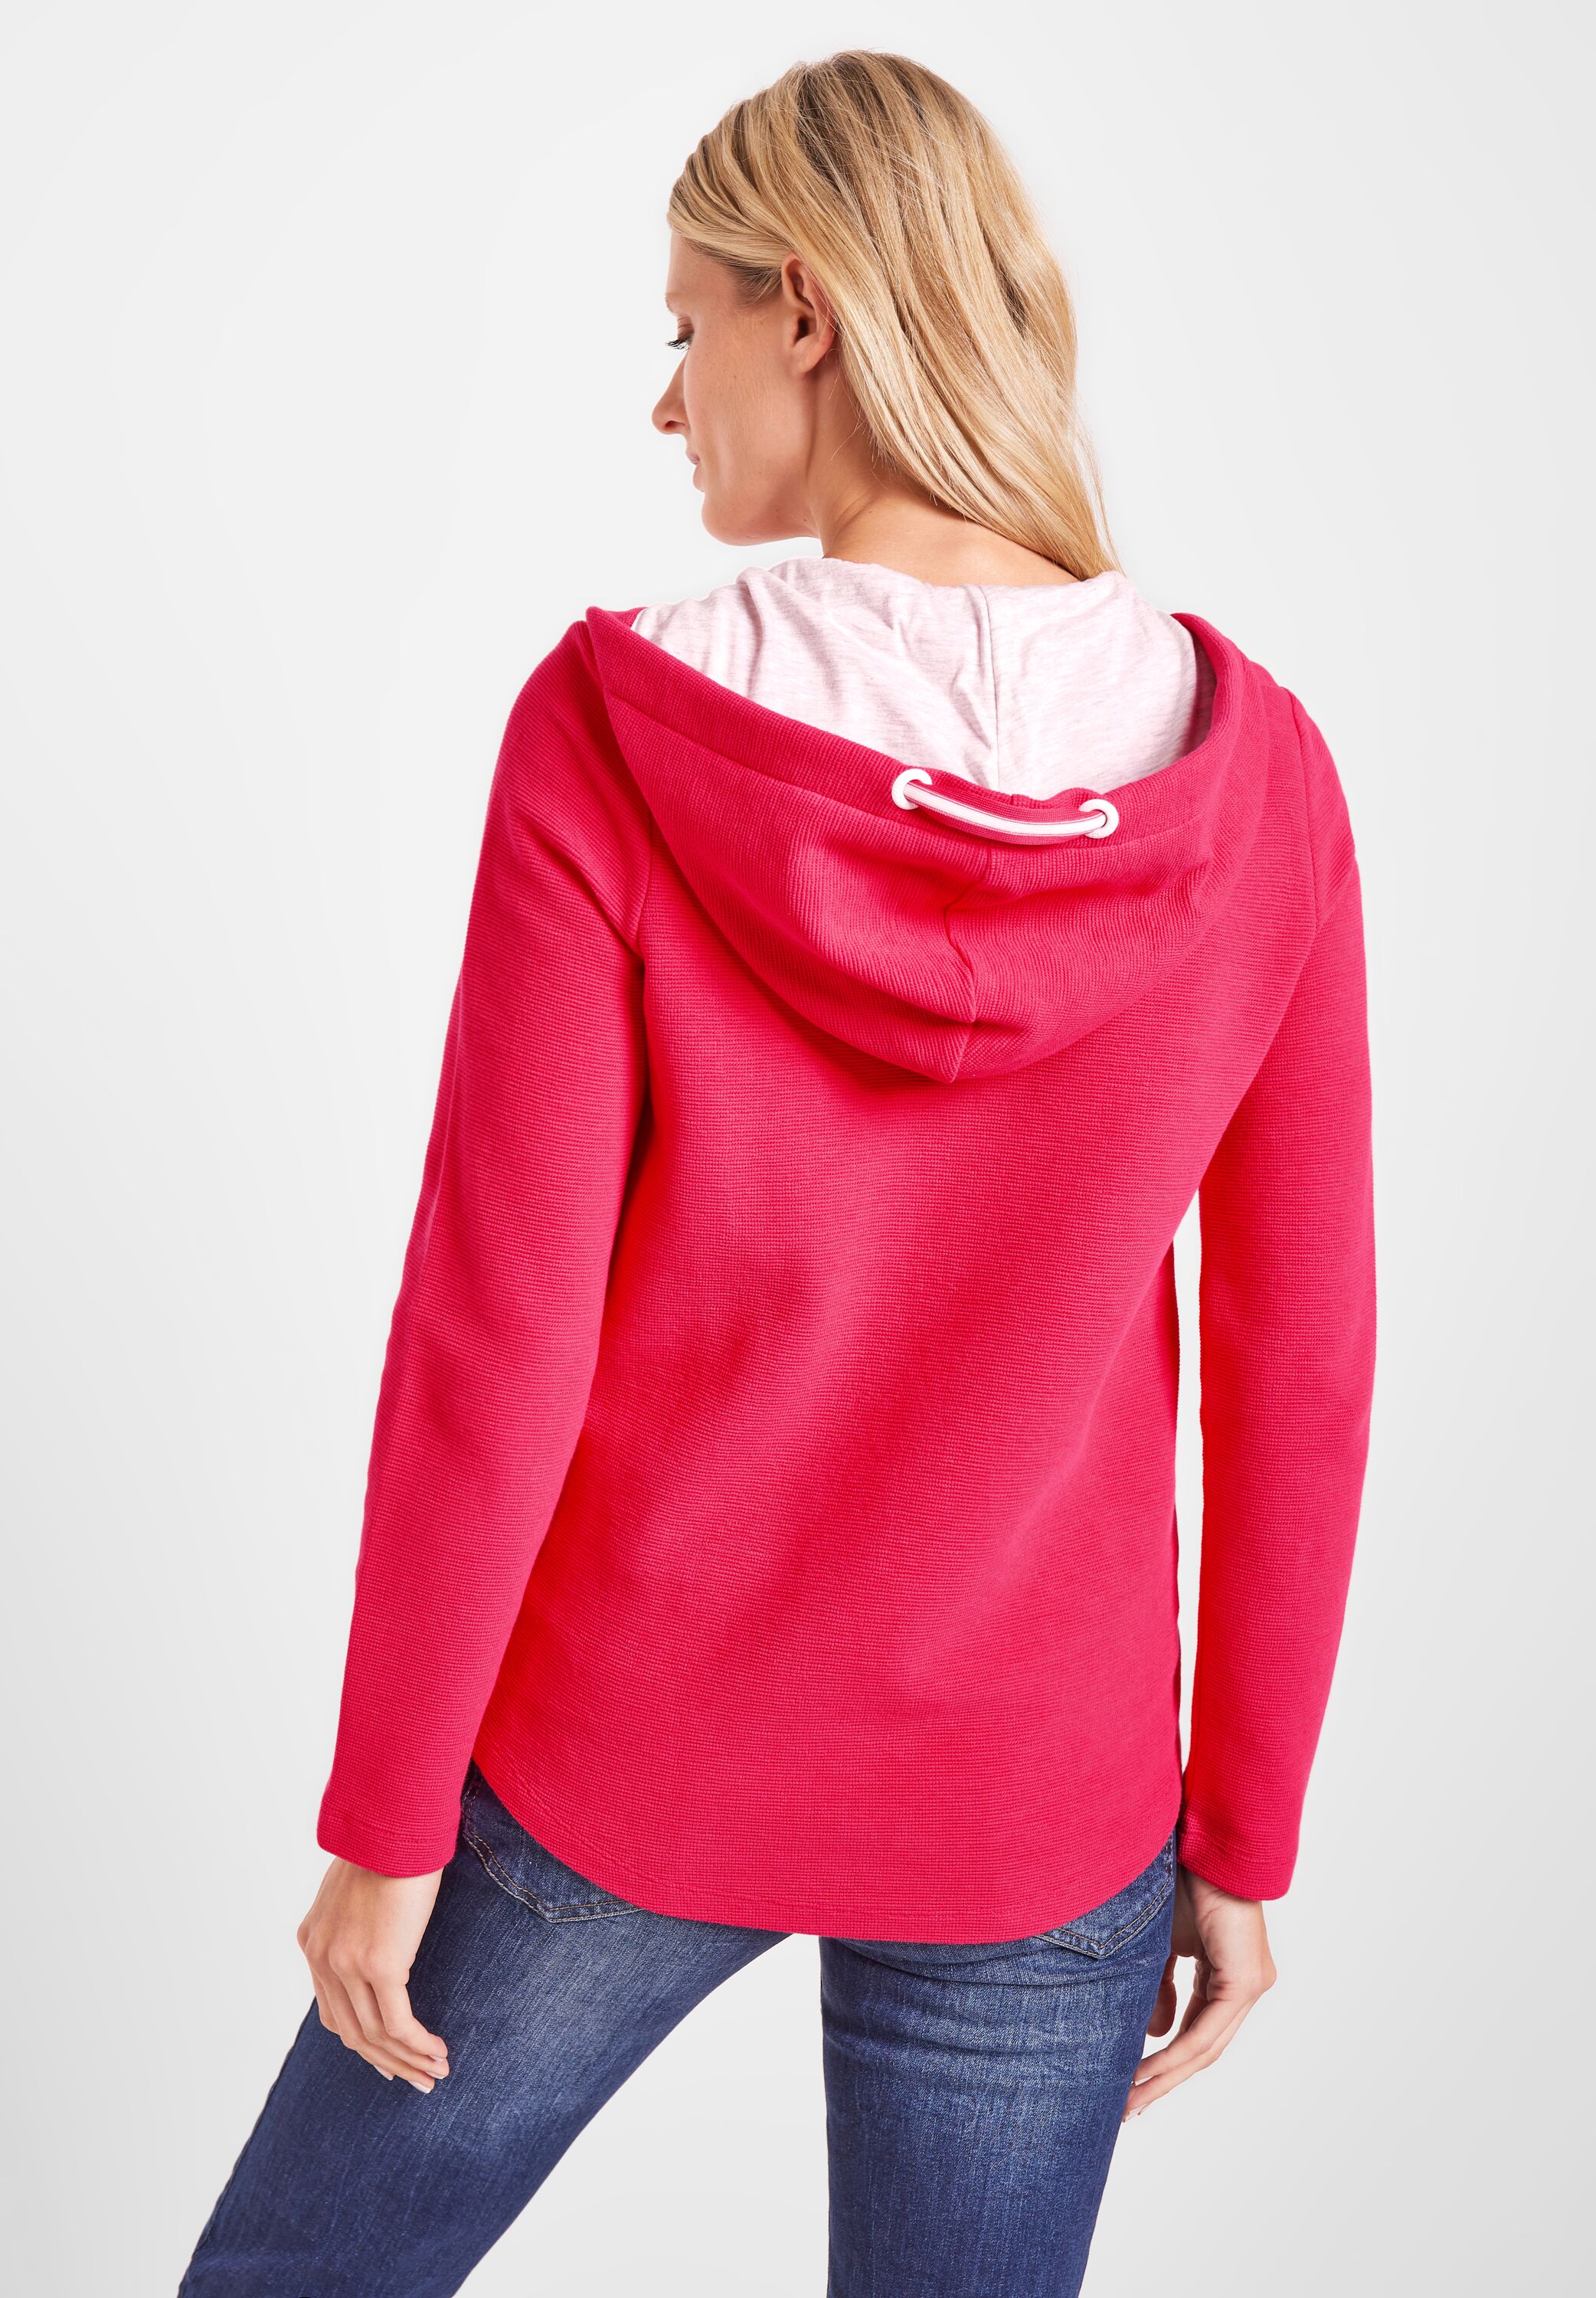 CECIL Shirtjacke in Strawberry Red im SALE reduziert B319398-14472 -  CONCEPT Mode